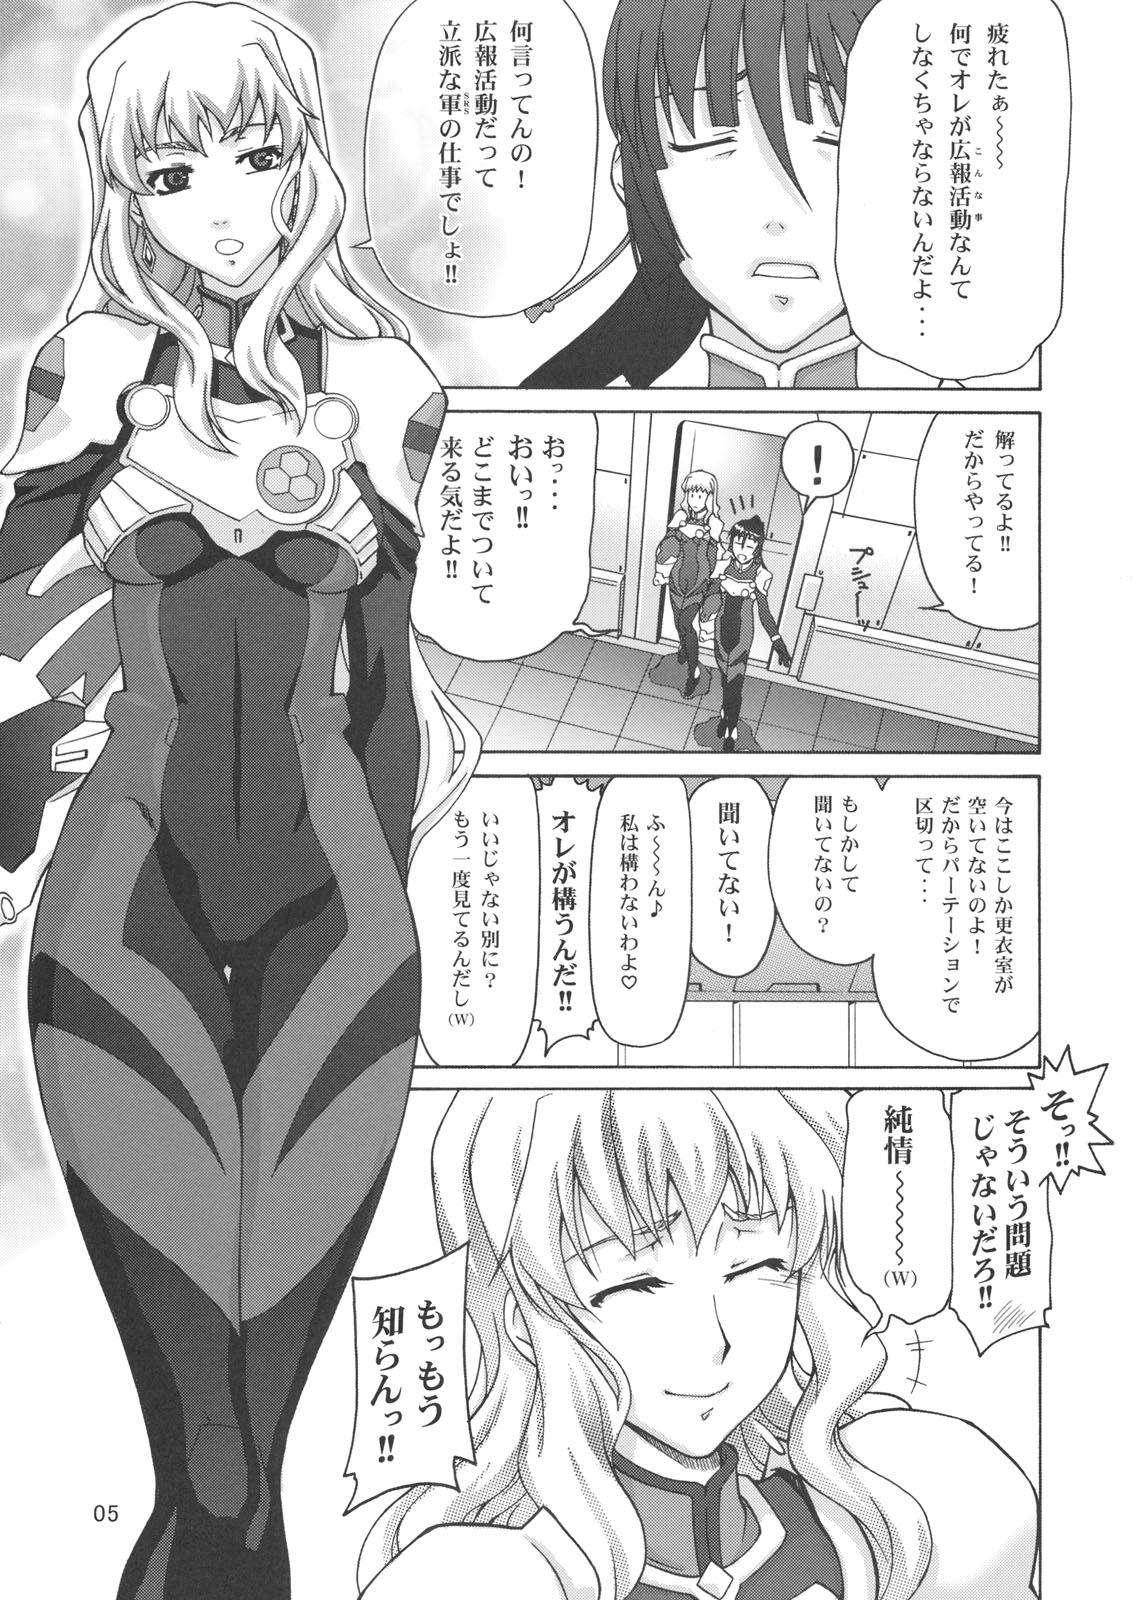 Famosa TSUNDERE Frontier - Macross frontier Toy - Page 4